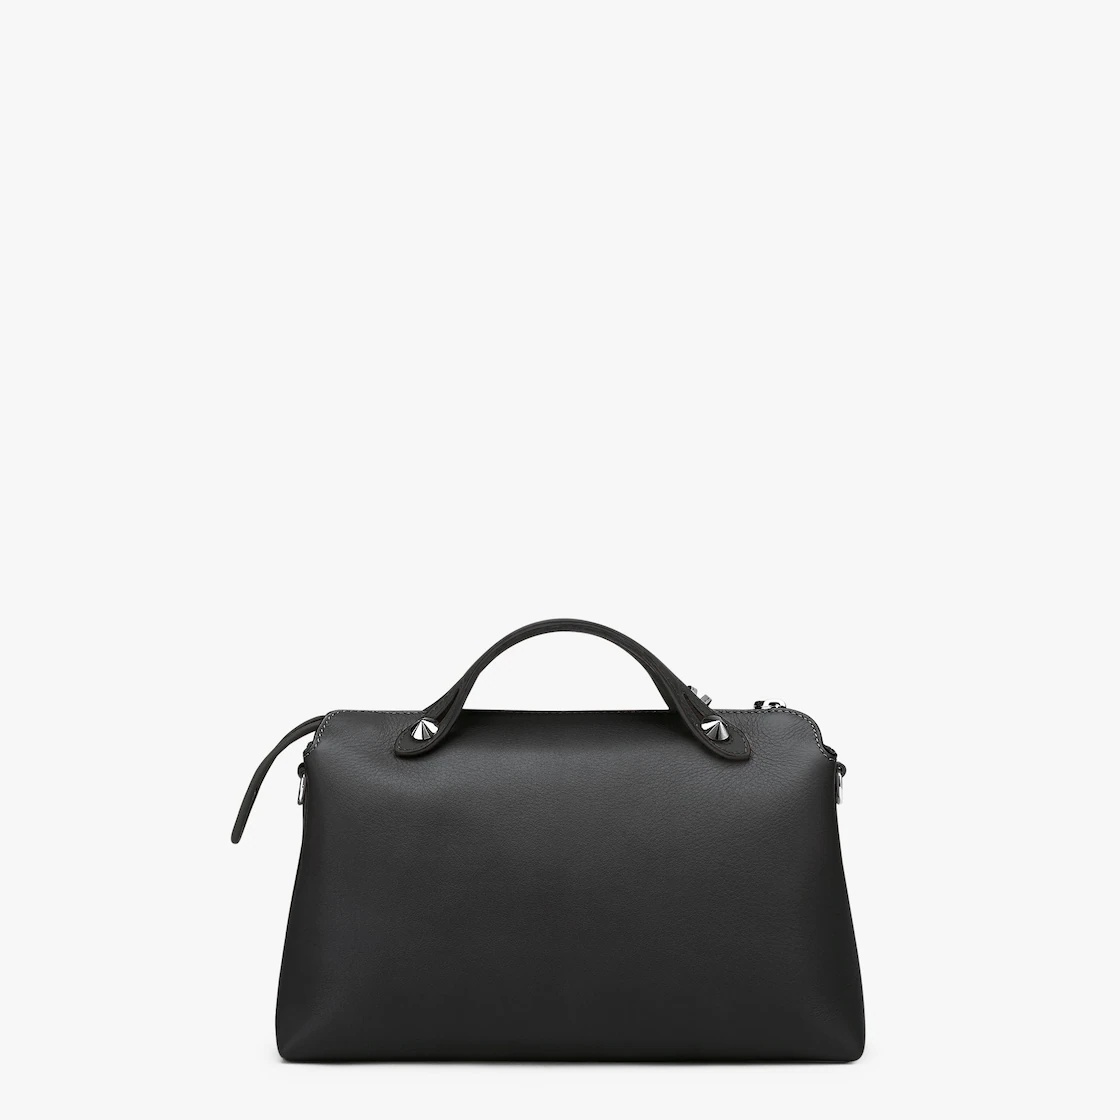 Soft black leather Boston bag. The interior is divided into two practical compartments by a partitio - 3